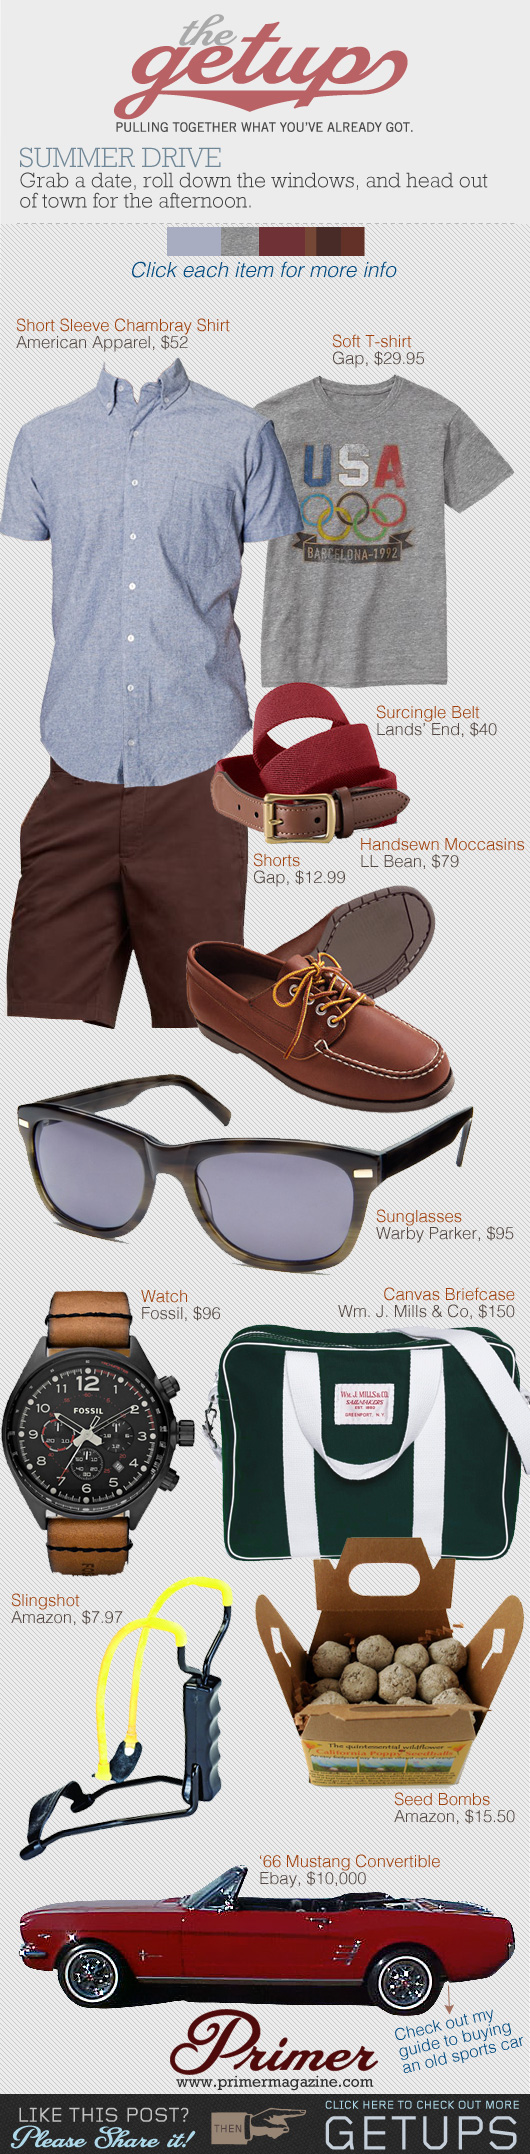 The Getup outfit collage - blue shirt, t-shirt, brown shorts, camp moc shoes